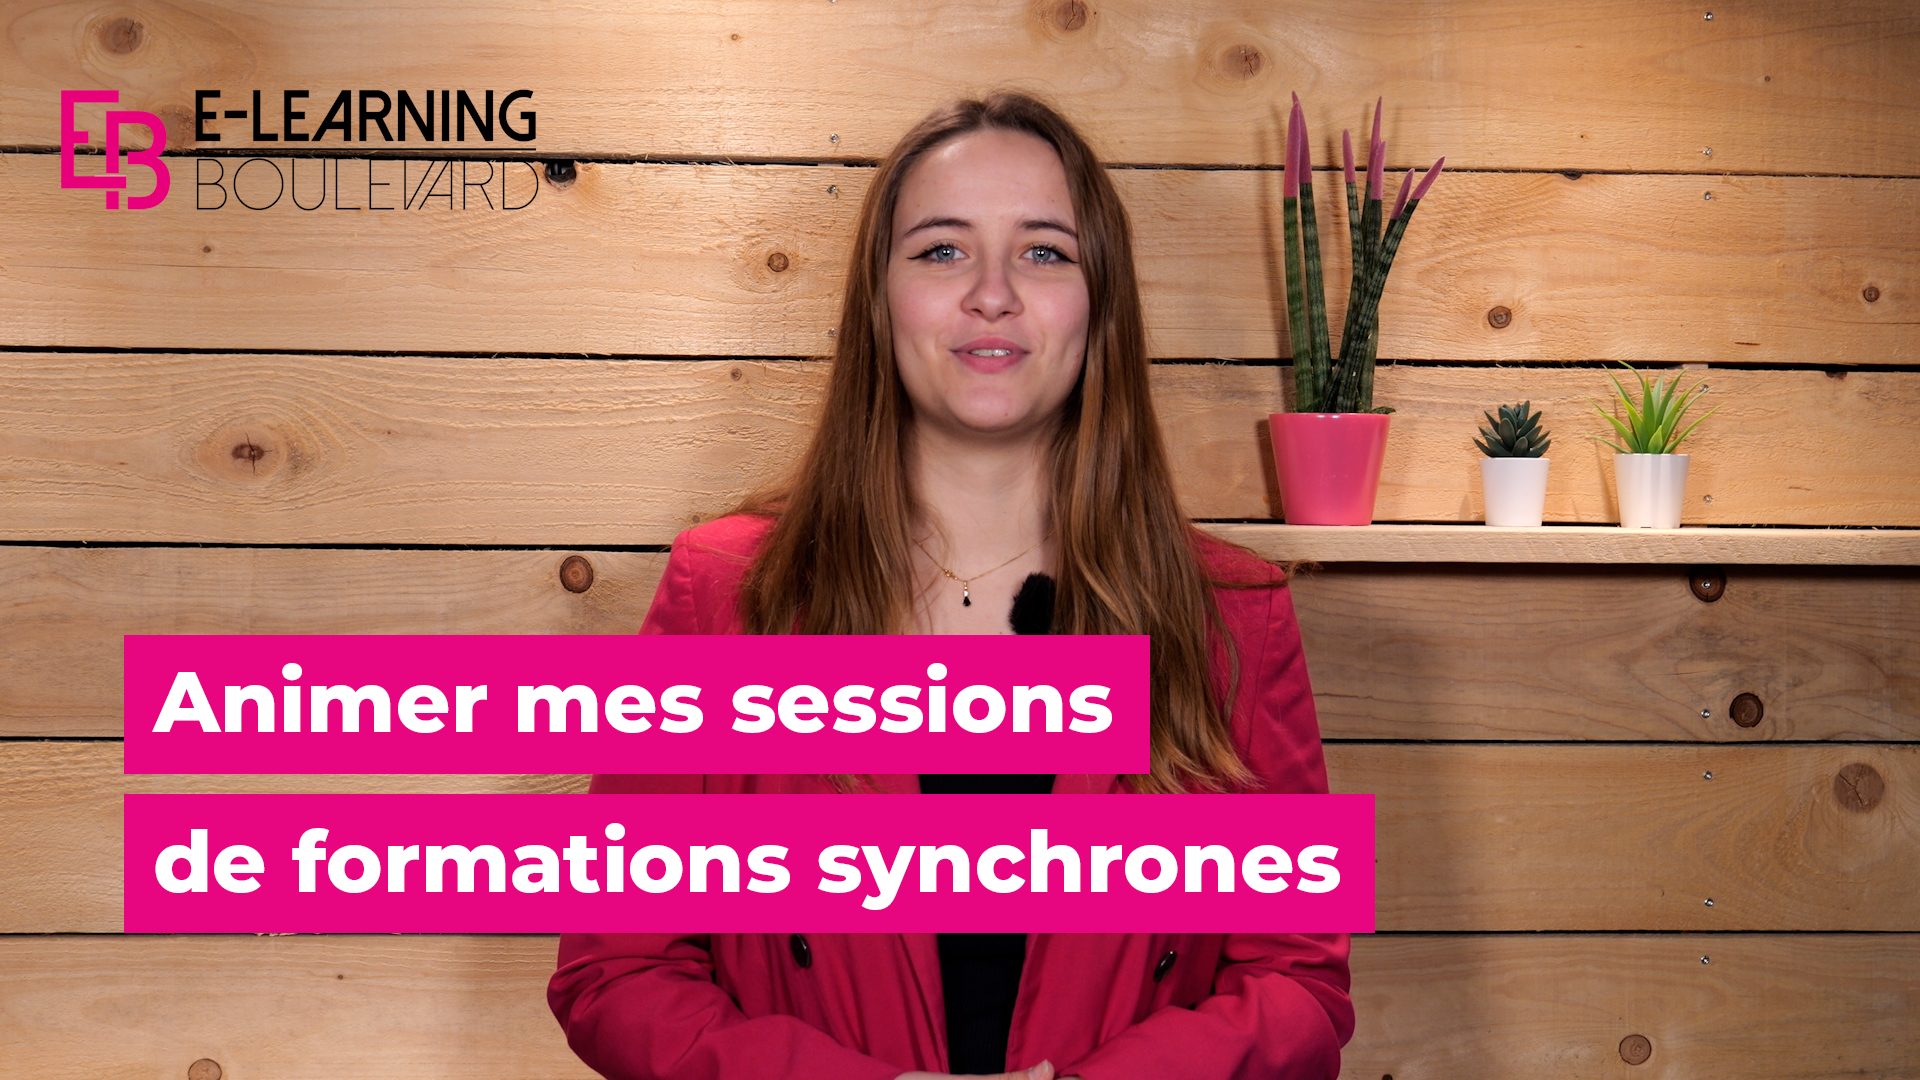 vignette animer sessions formations synchrones